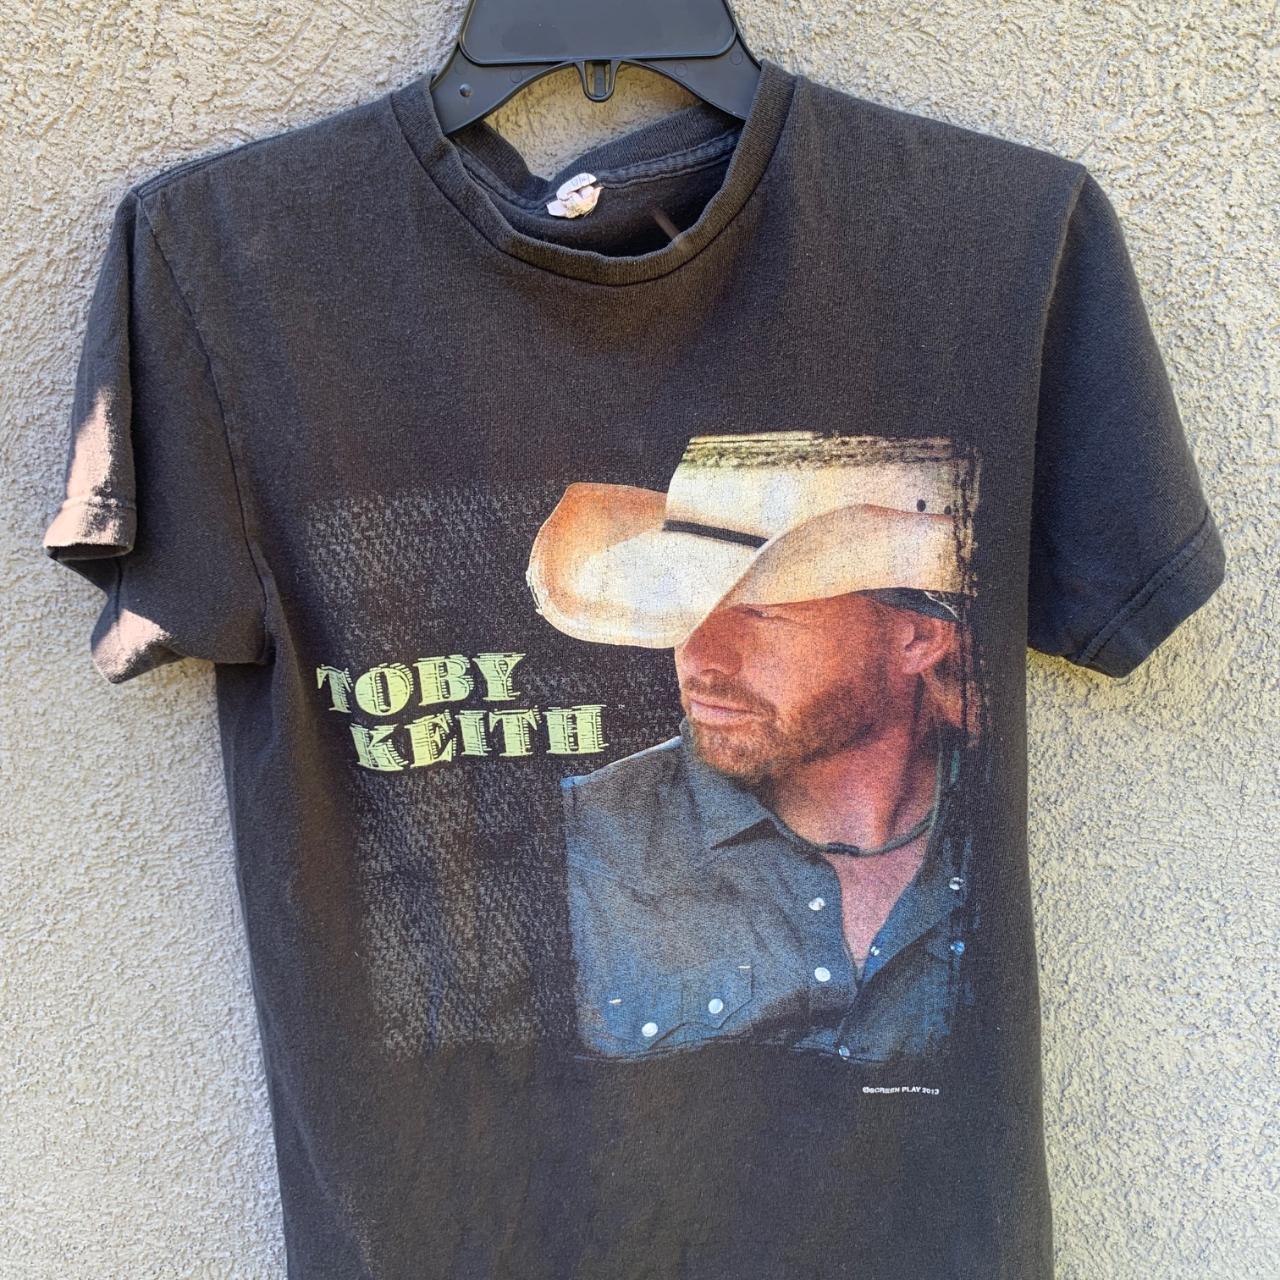 2013 Toby Keith Tour T-Shirt Shirt is from the... - Depop